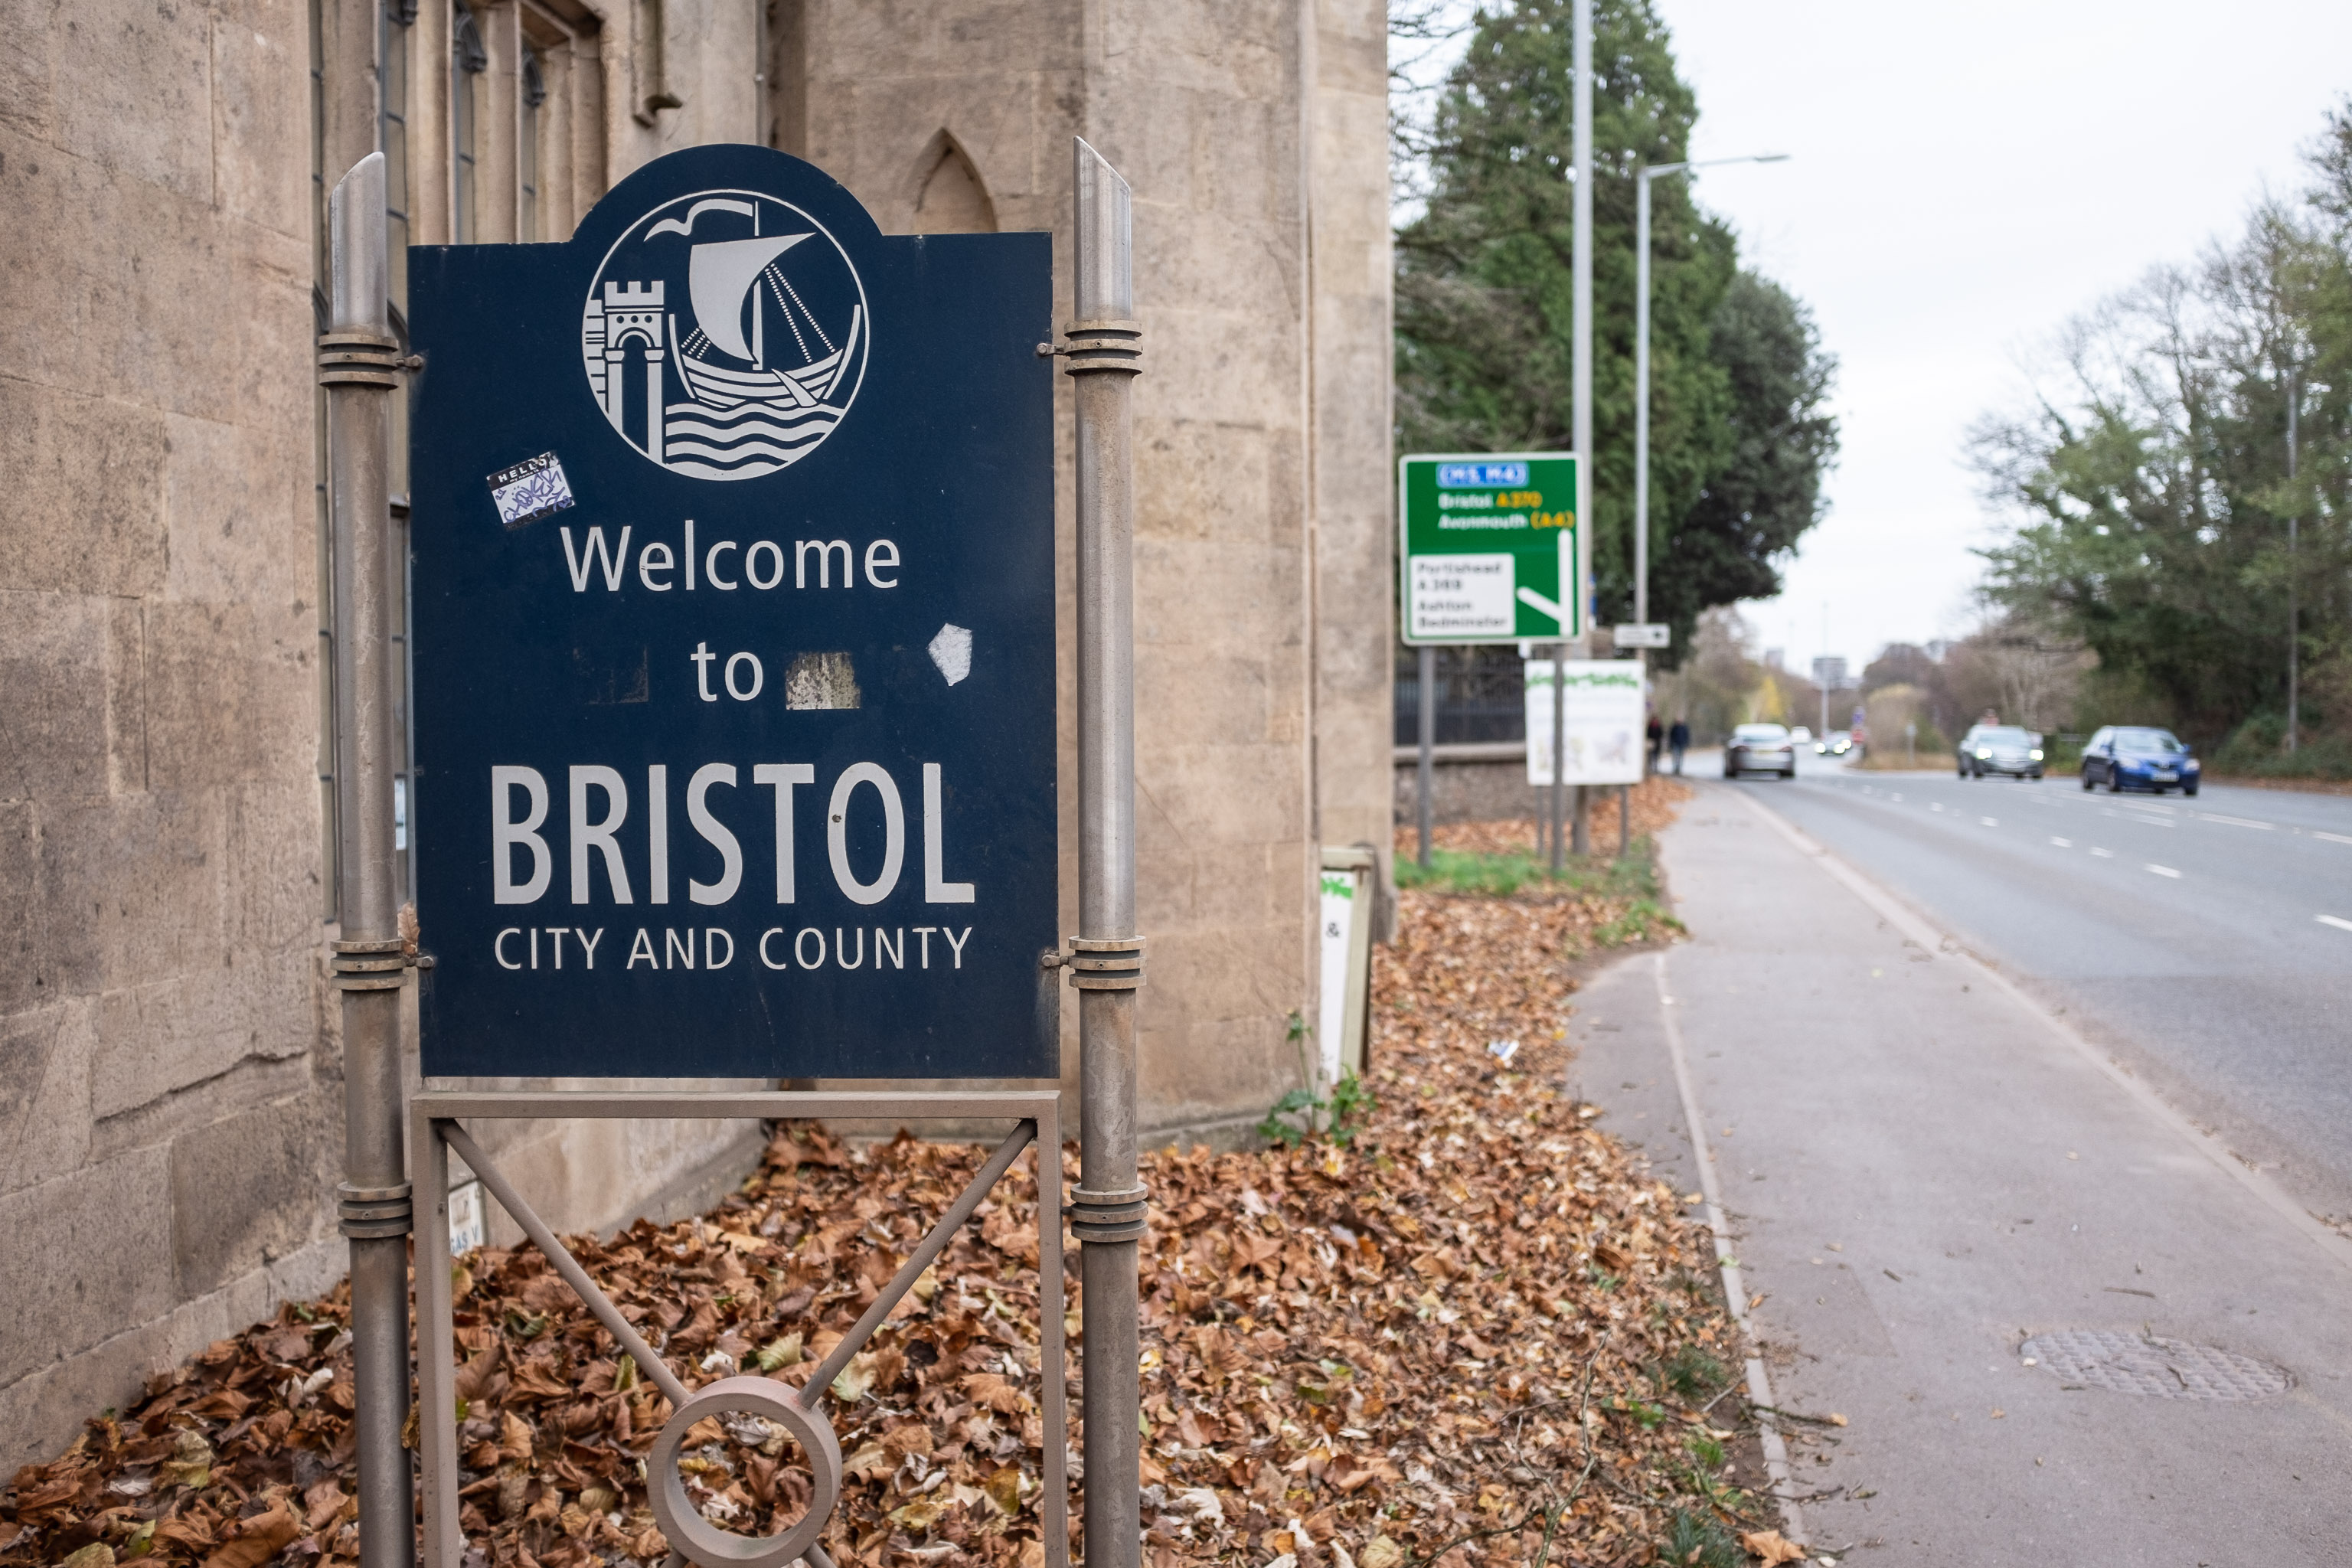 Welcome to Bristol
As on our last jaunt, we've left the city behind and stepped into Somerset.
